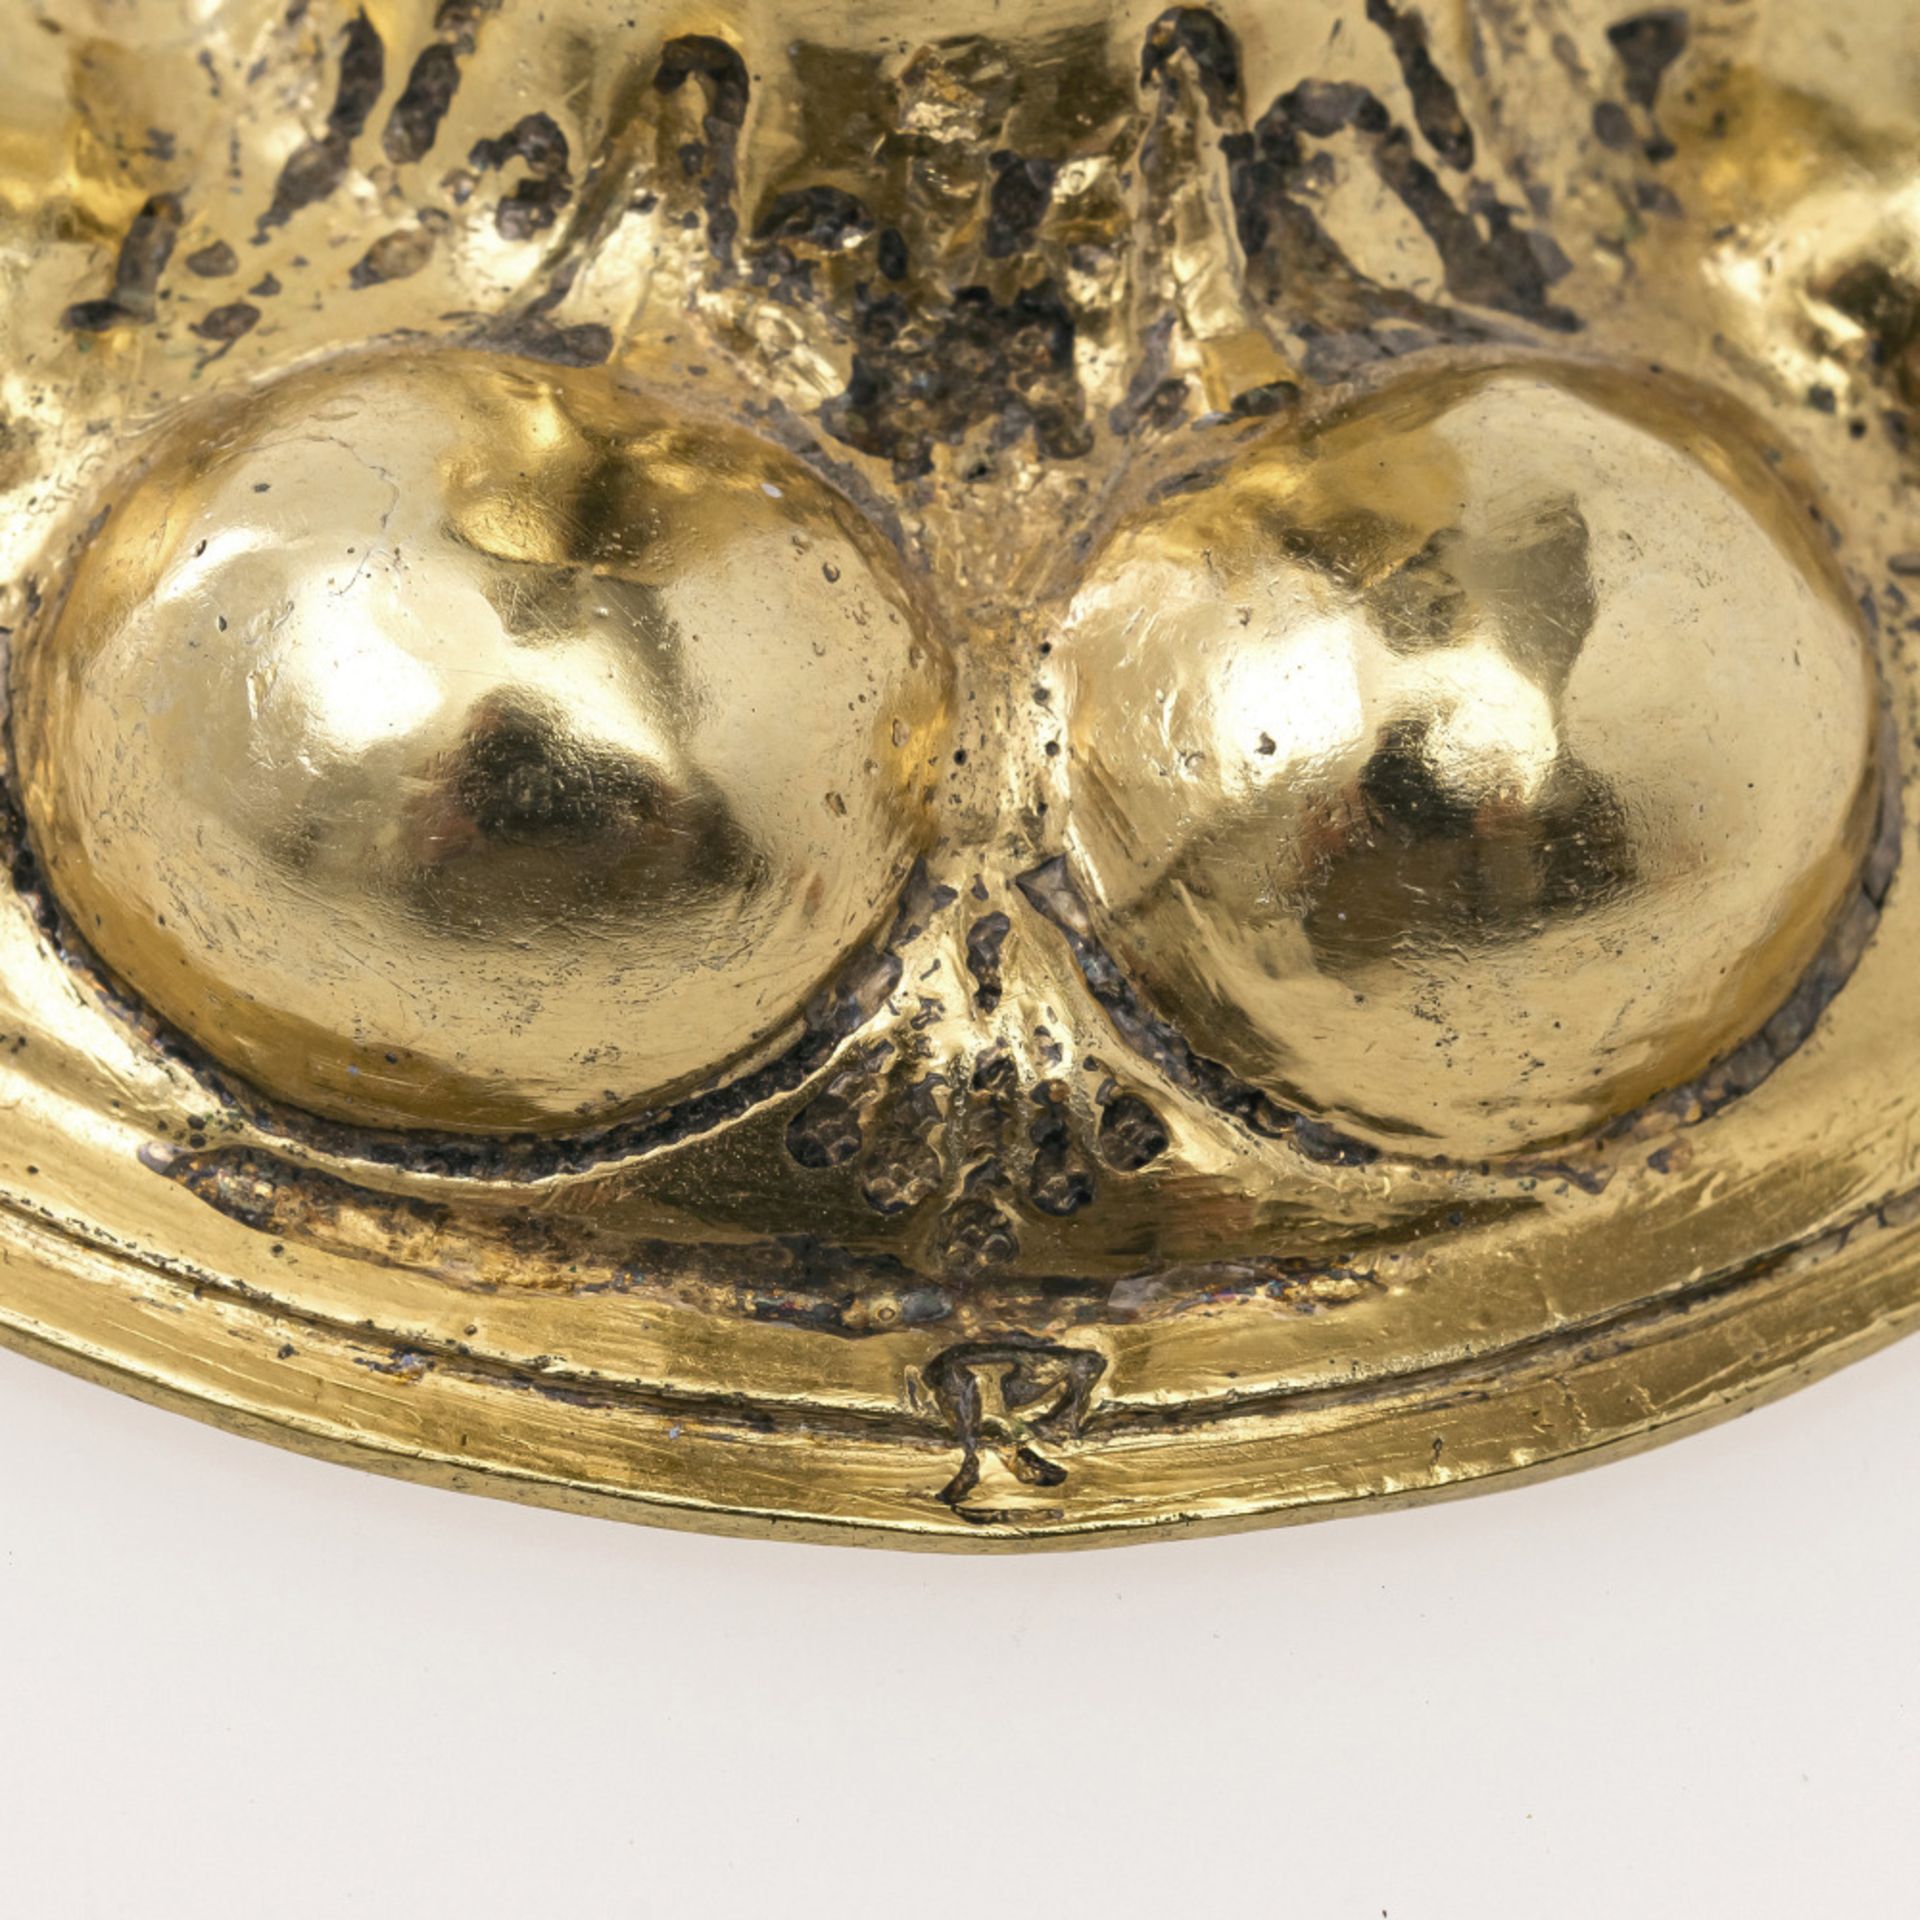 A small goblet with bosses - Nuremberg, circa 1640/1650, Lorenz Kabes - Image 2 of 2